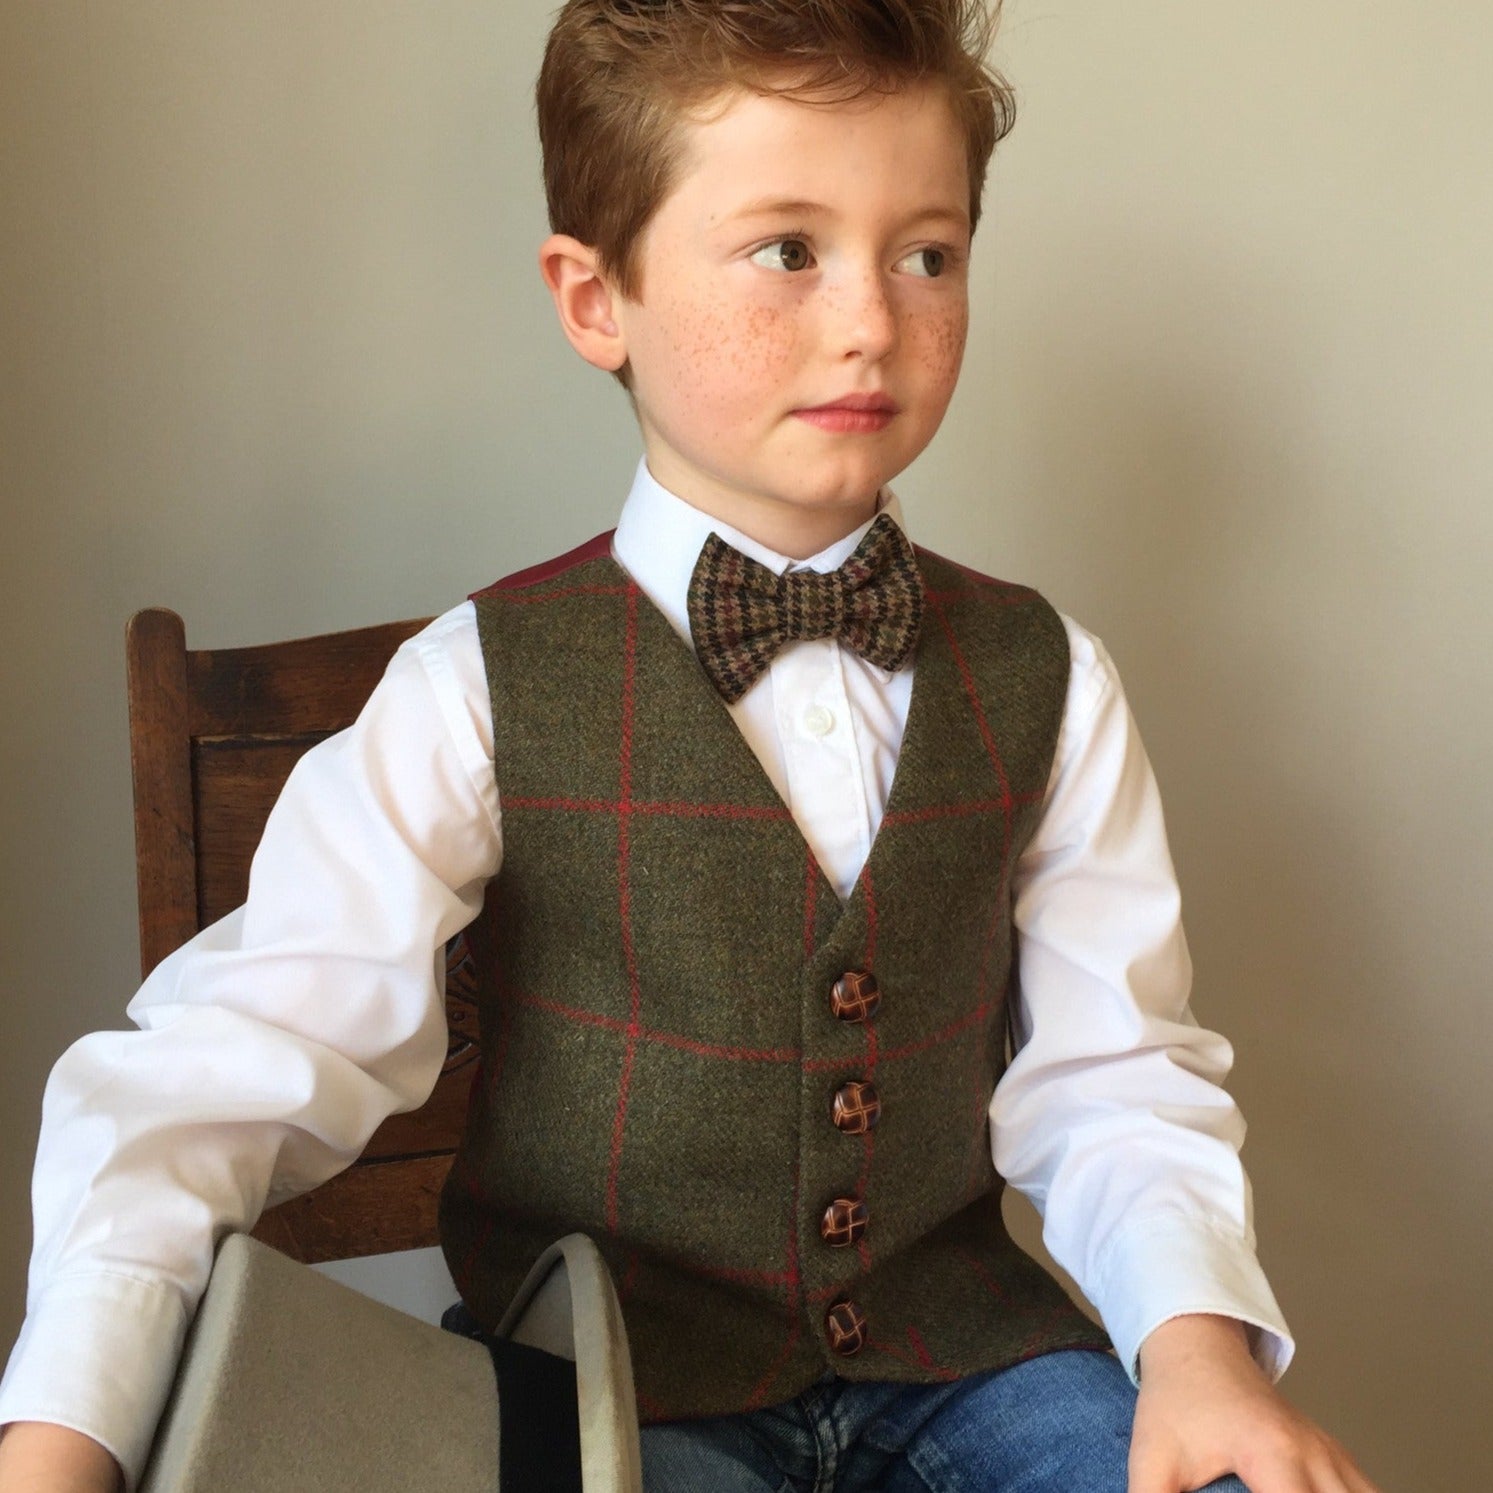 Boys waistcoat, British Tweed waistcoat, pageboy outfit, boys clothing, olive green and red check waistcoat - caractacus potts